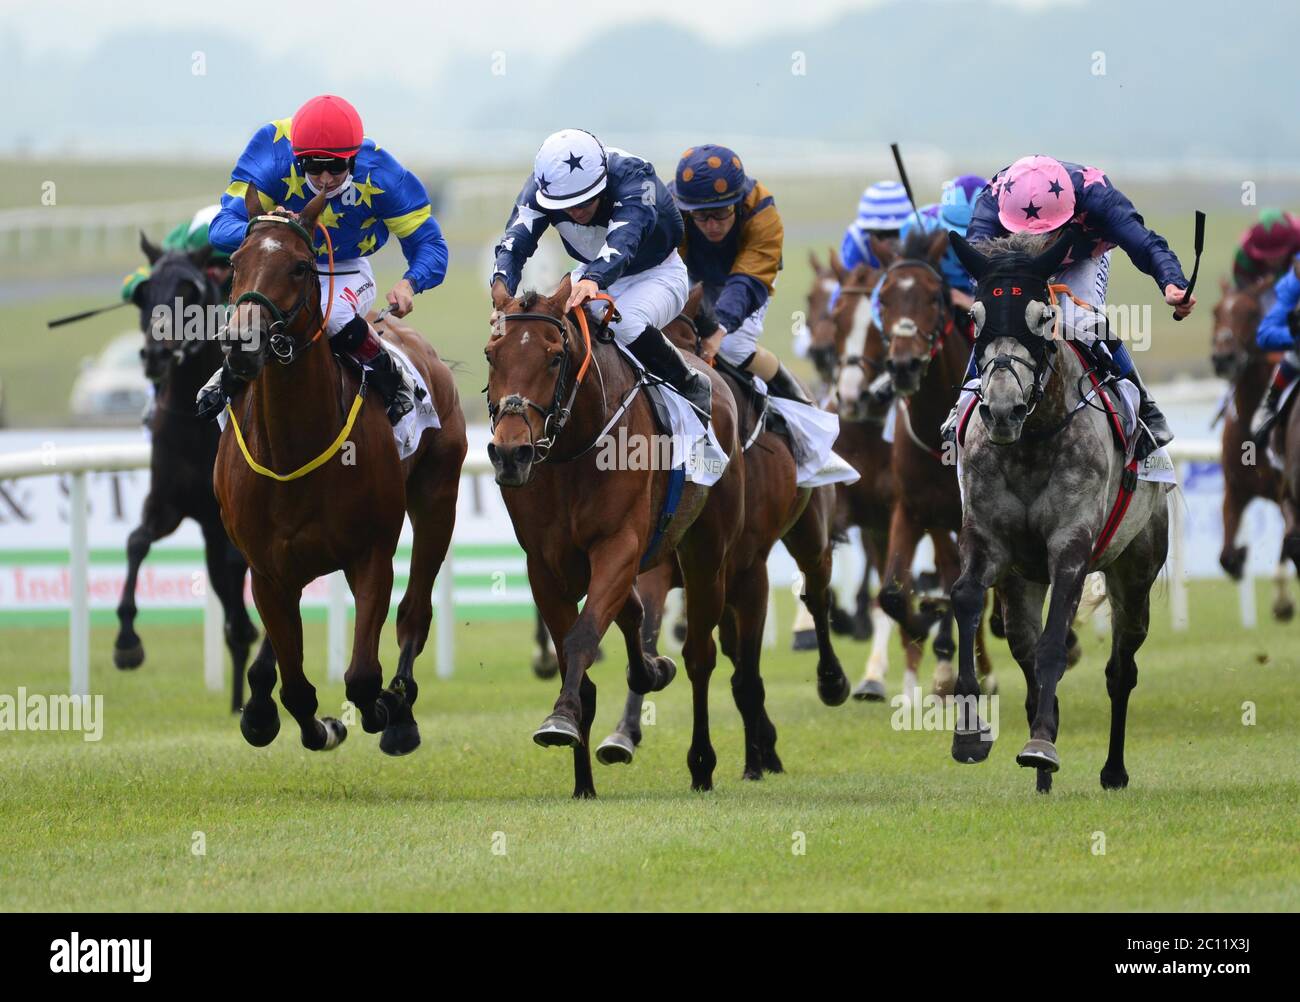 Mutadaffeq ridden by Wayne Lordan (blue and white silks) beats Jerandme (left) and Graceland (right) to win The EquiNectar Handicap at Curragh Racecourse. Stock Photo